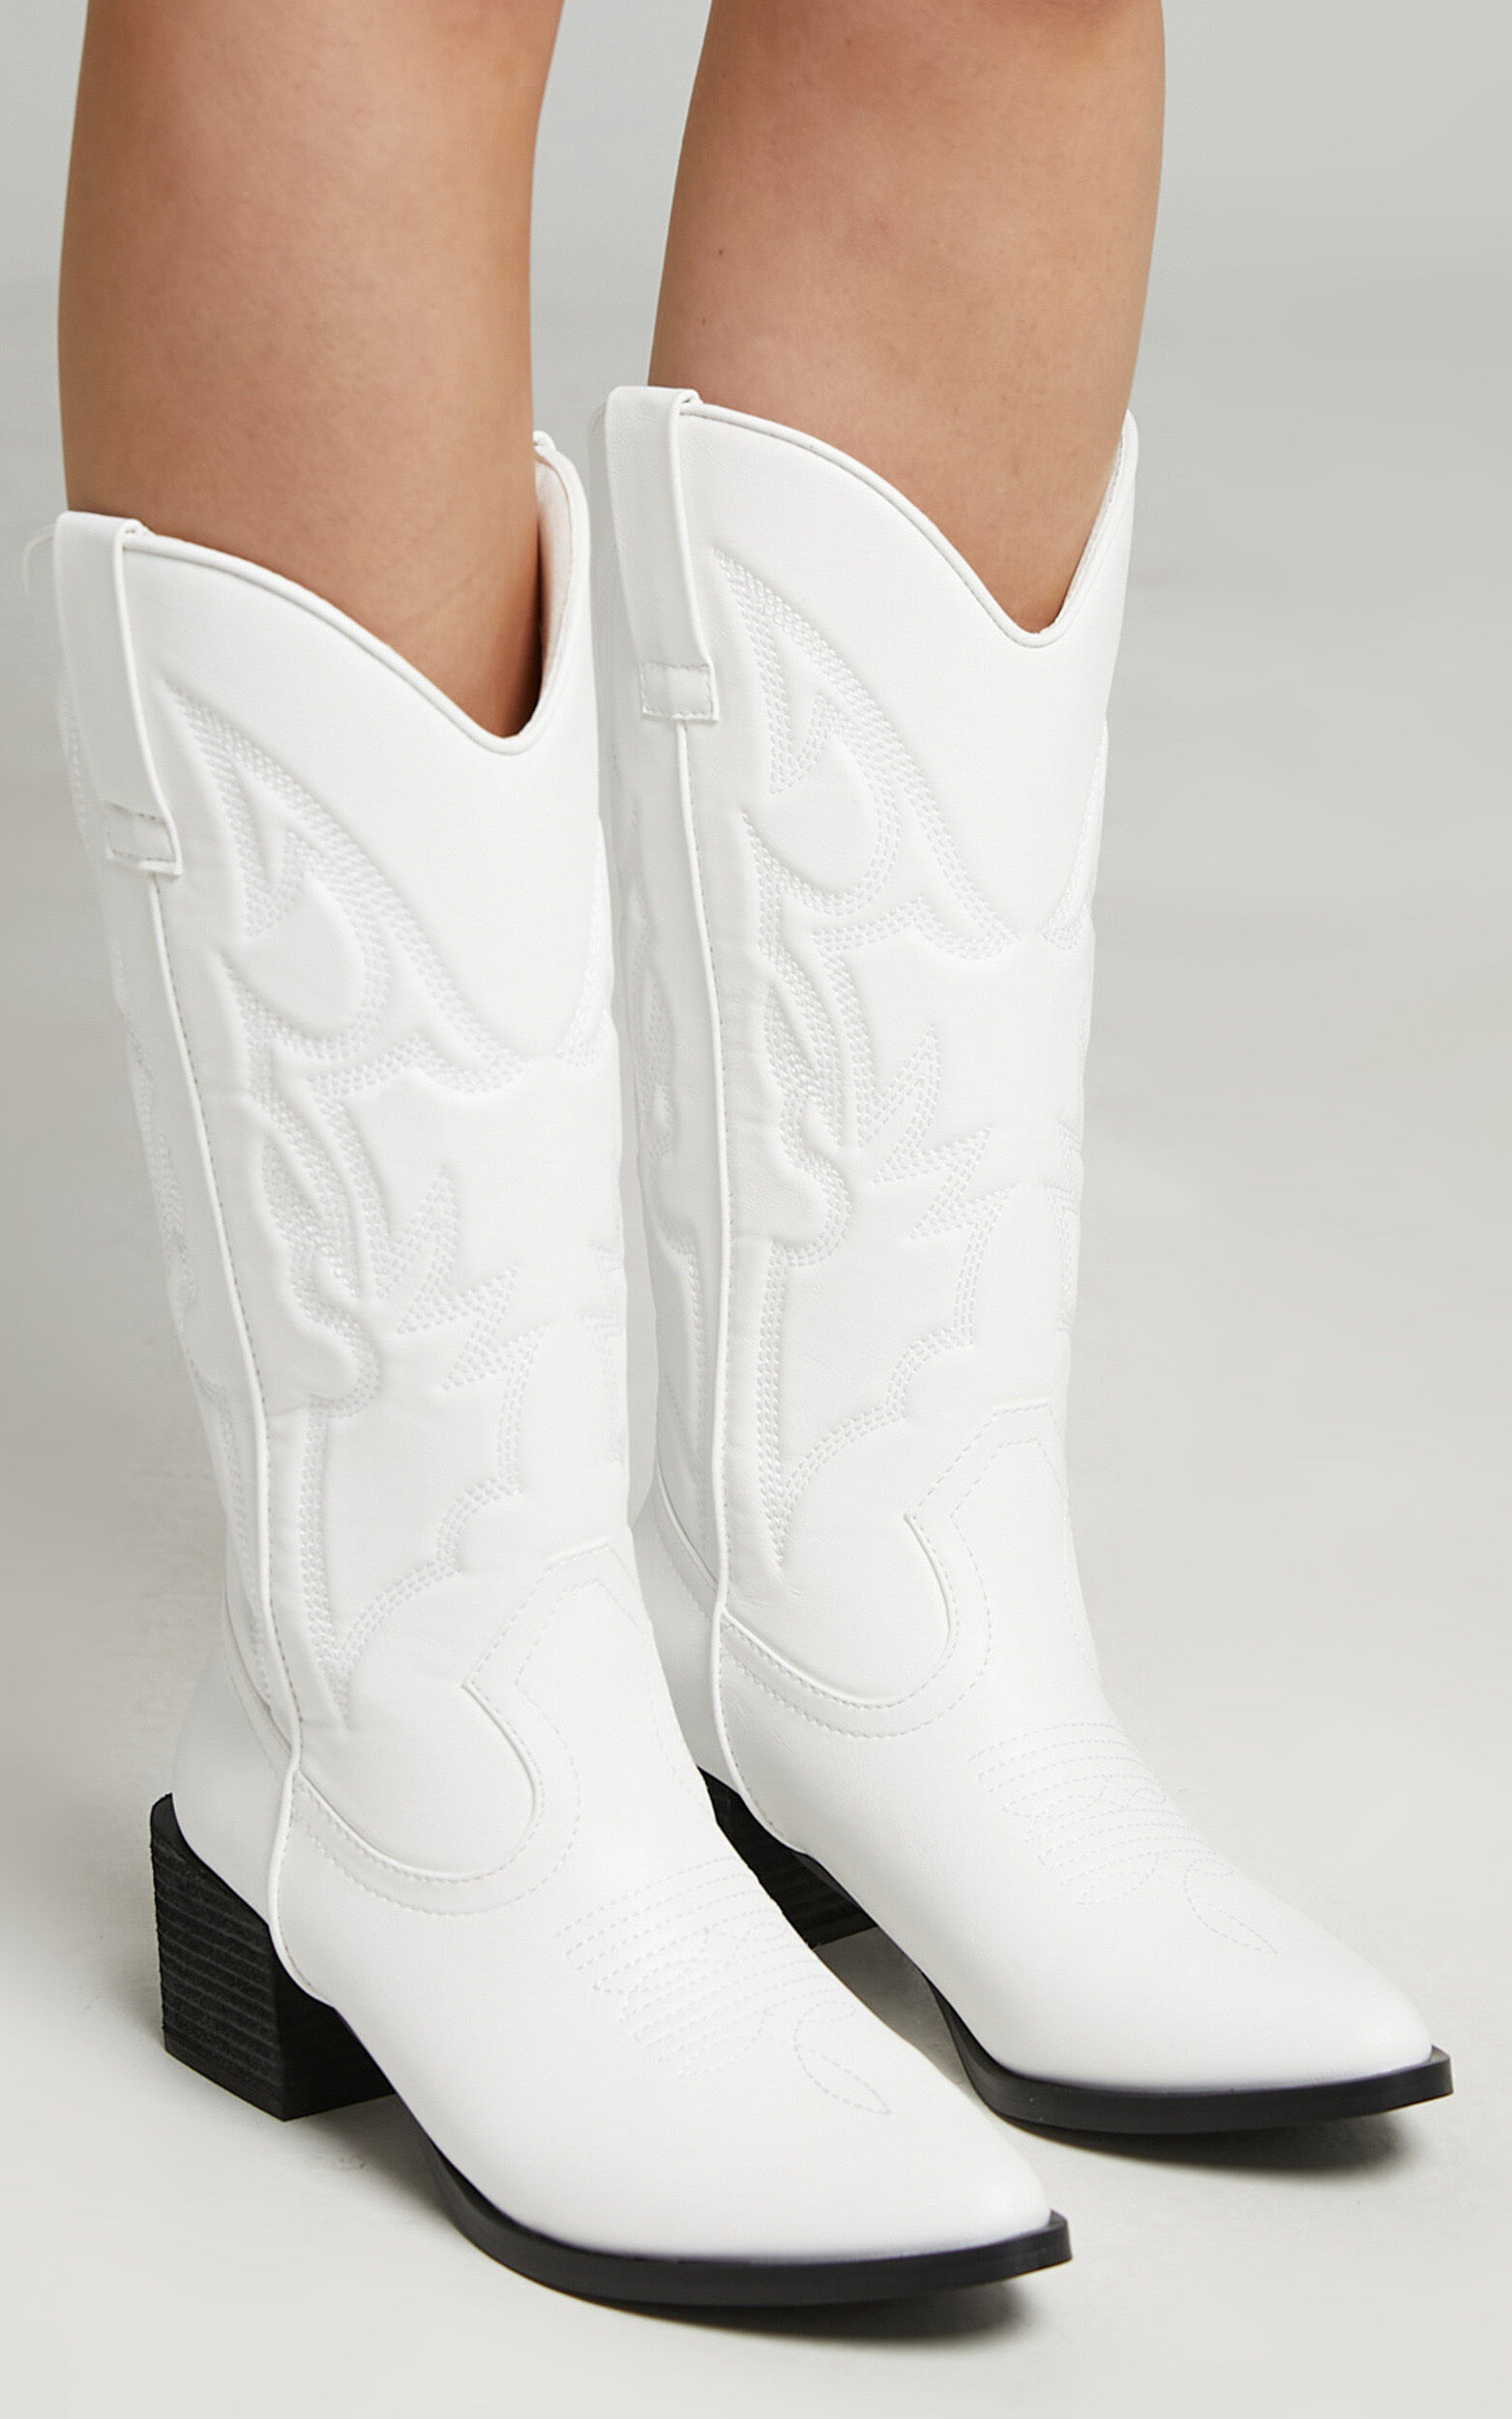 Therapy - Ranger Boots in White - 07, WHT1, super-hi-res image number null